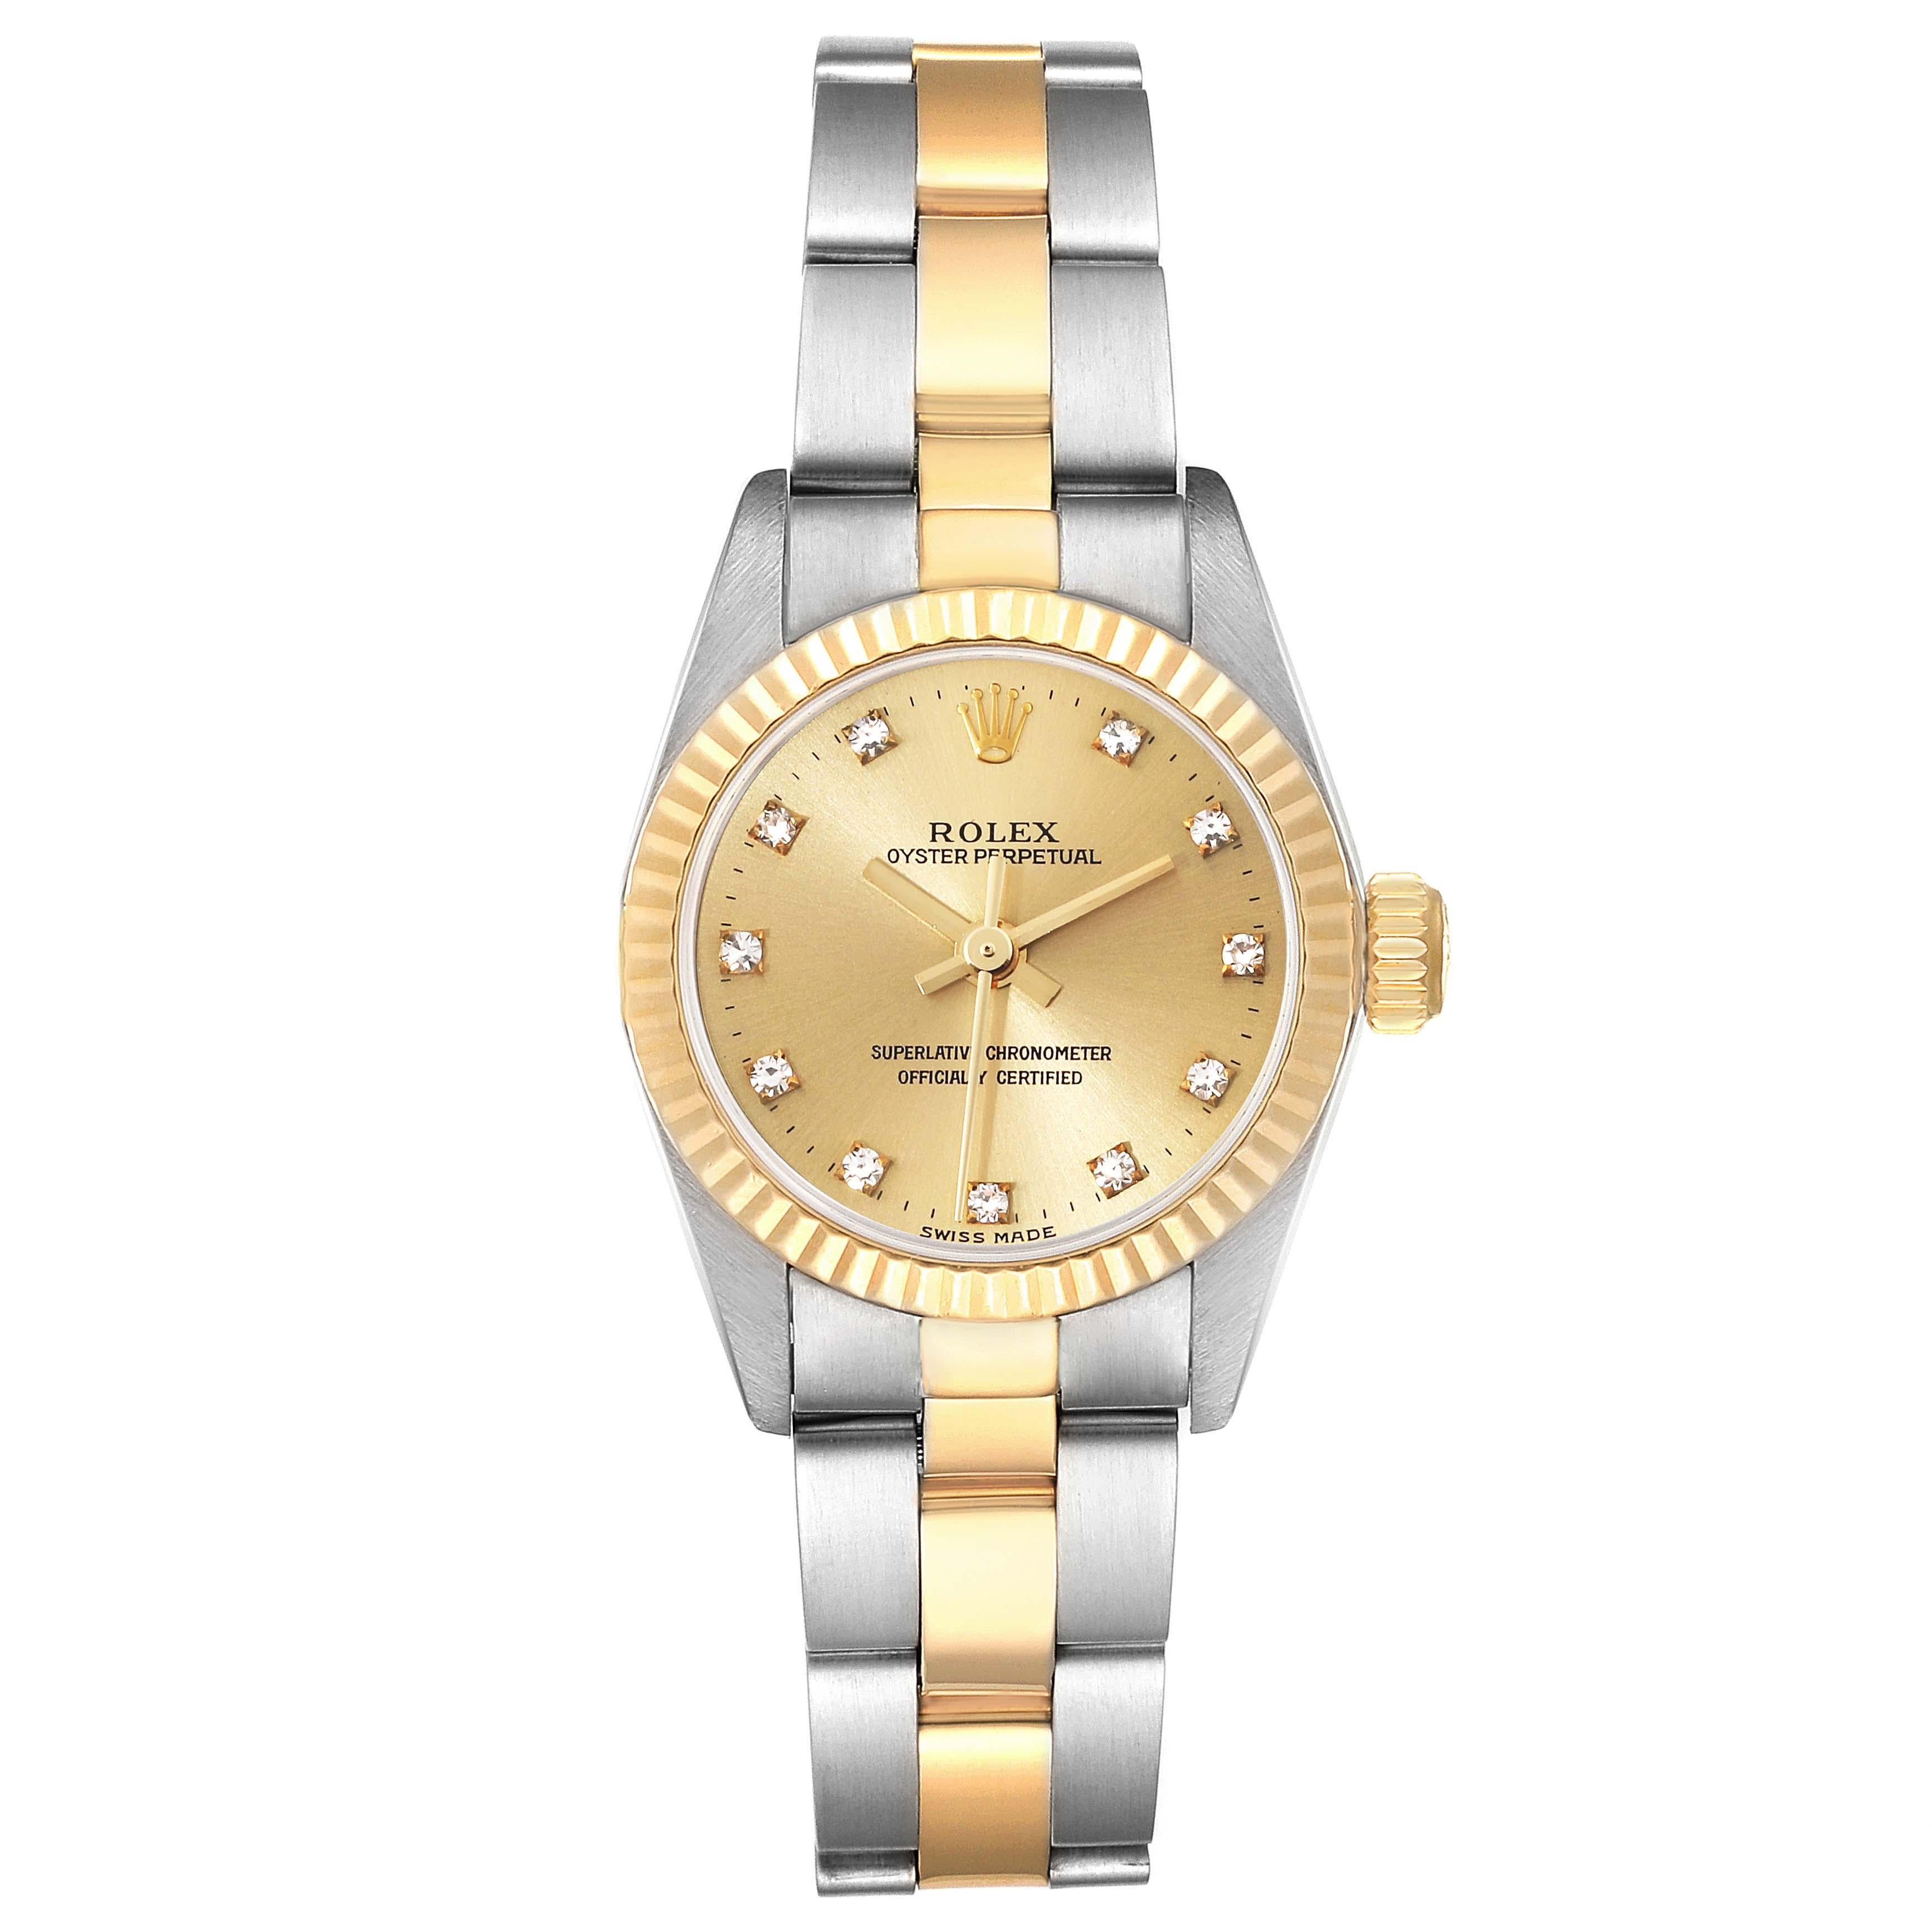 Rolex Oyster Perpetual Steel Yellow Gold Diamond Dial Ladies Watch 67193. Officially certified chronometer automatic self-winding movement. Stainless steel oyster case 24.0 mm in diameter. Rolex logo on an 18k yellow gold crown. 18k yellow gold